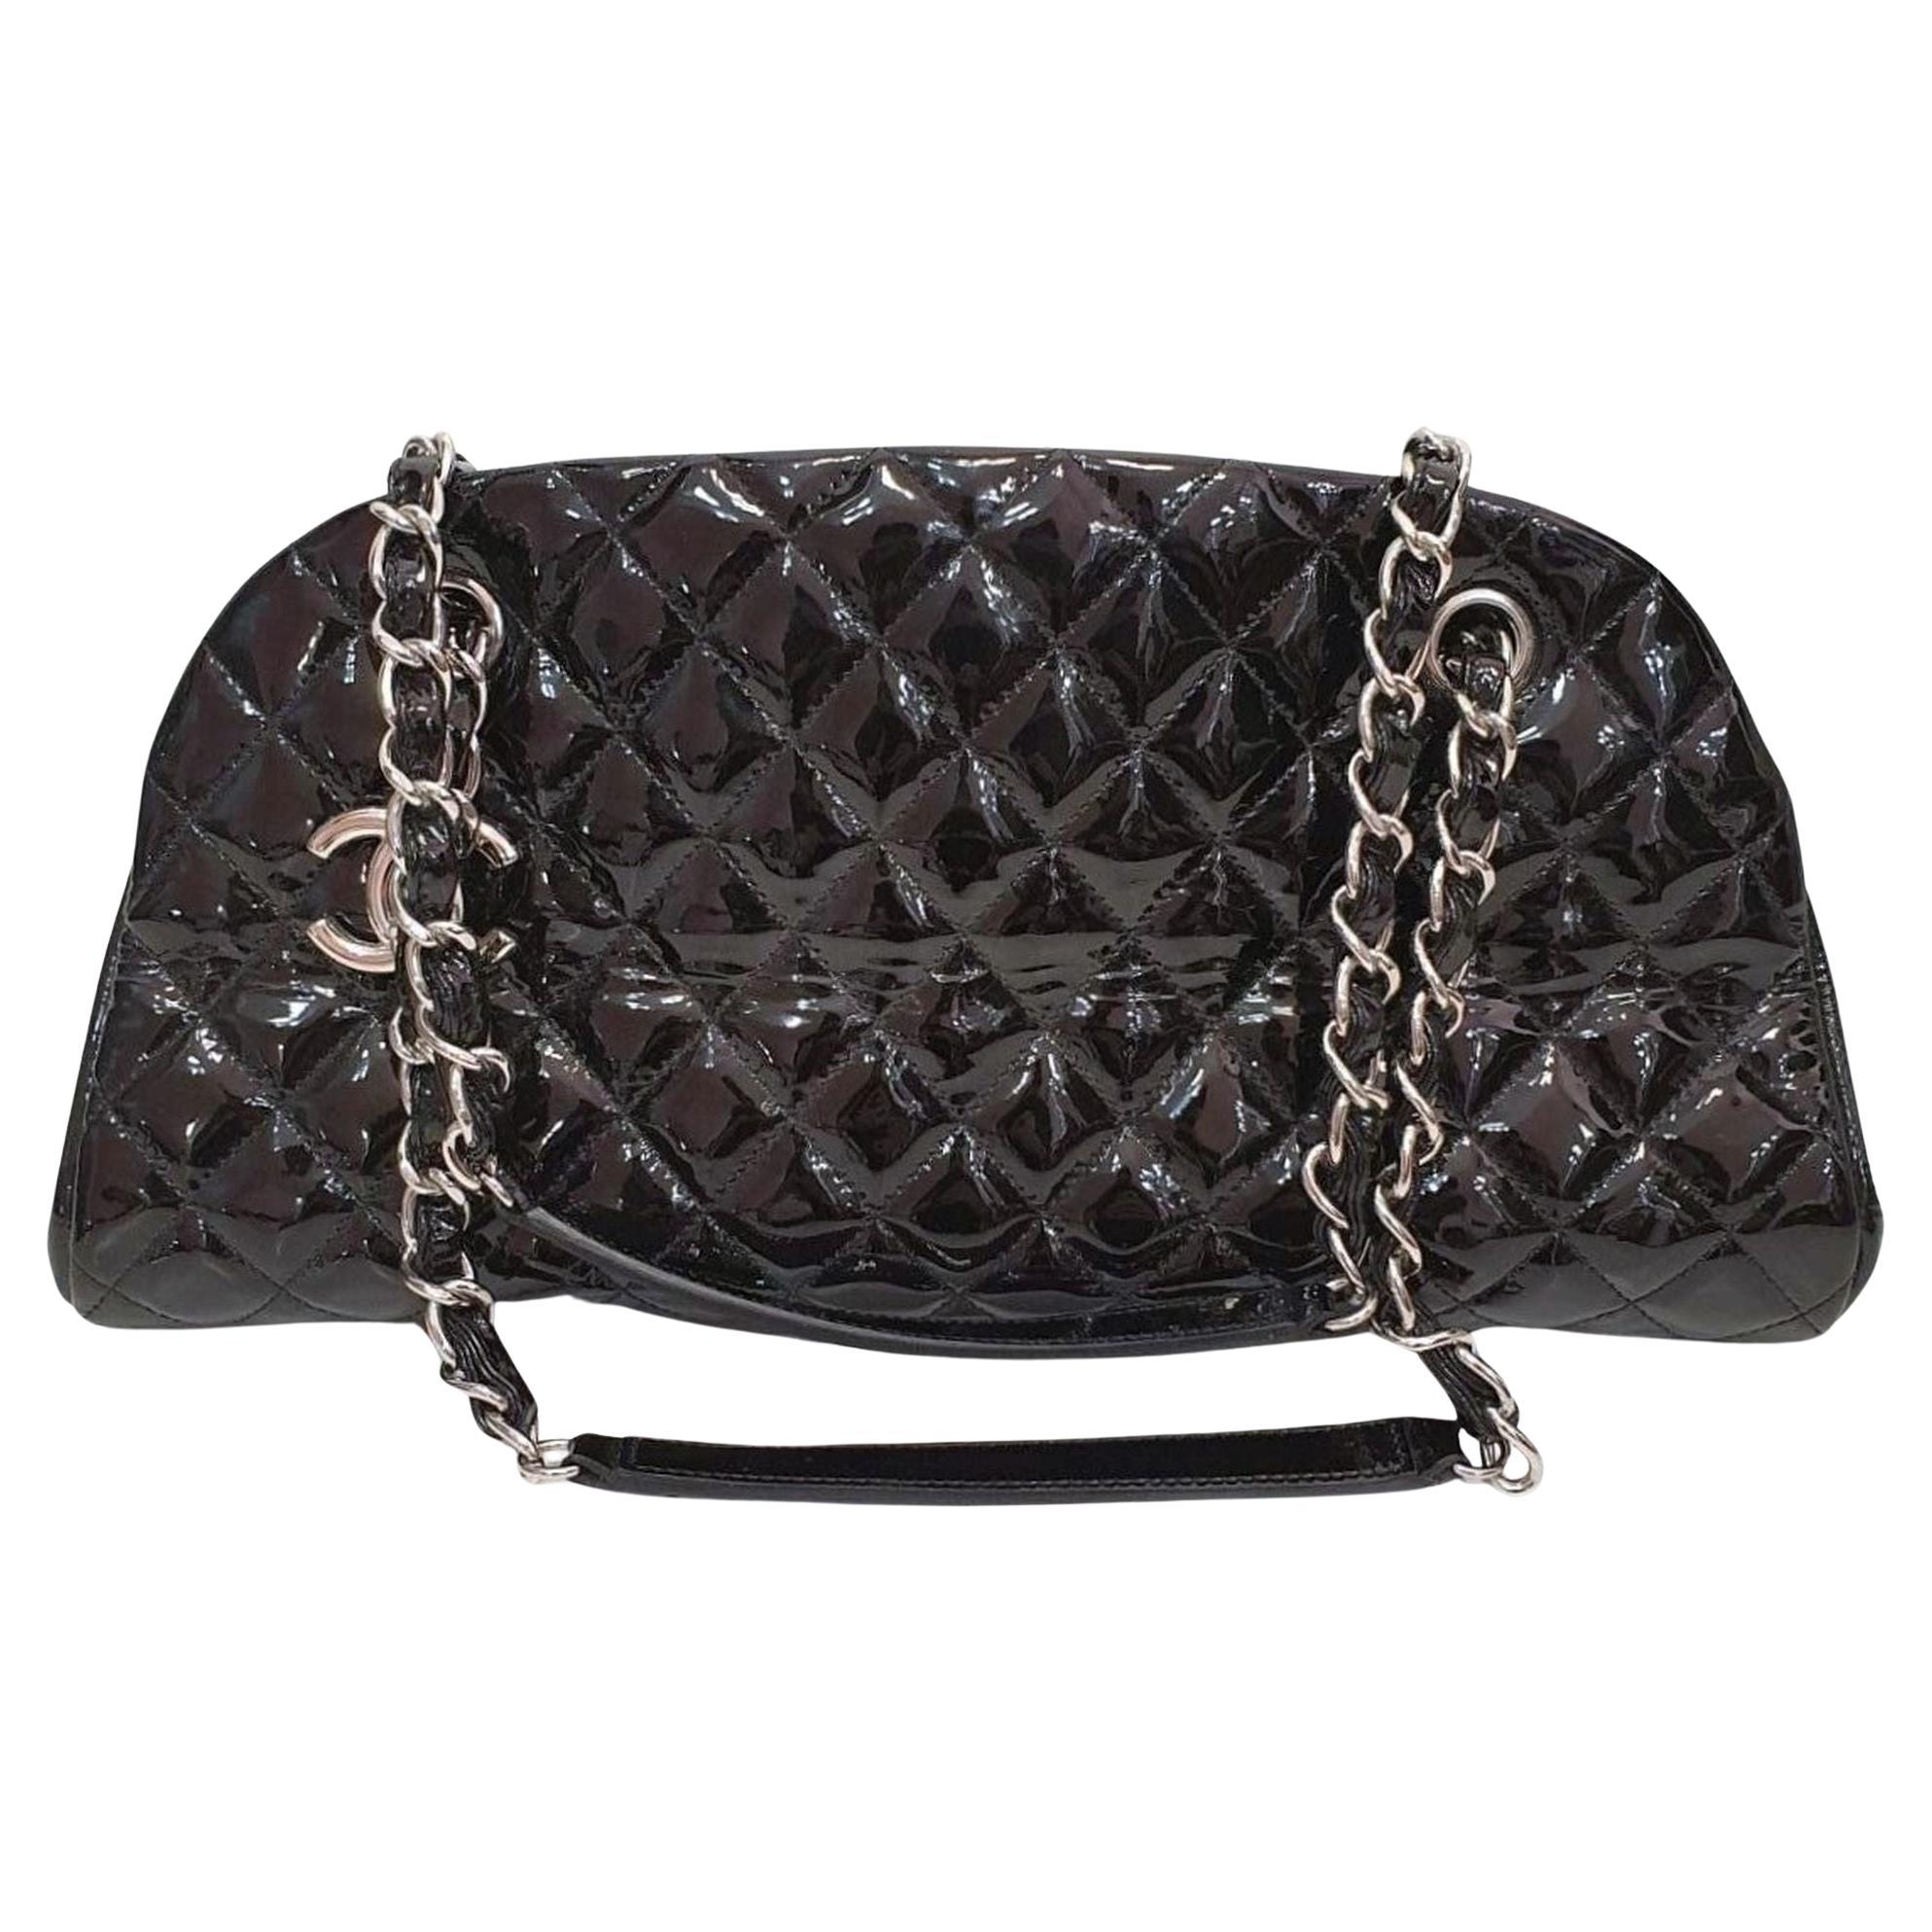 Classic Vintage Chanel Patent Leather Quilted Shoulder Bag For Sale